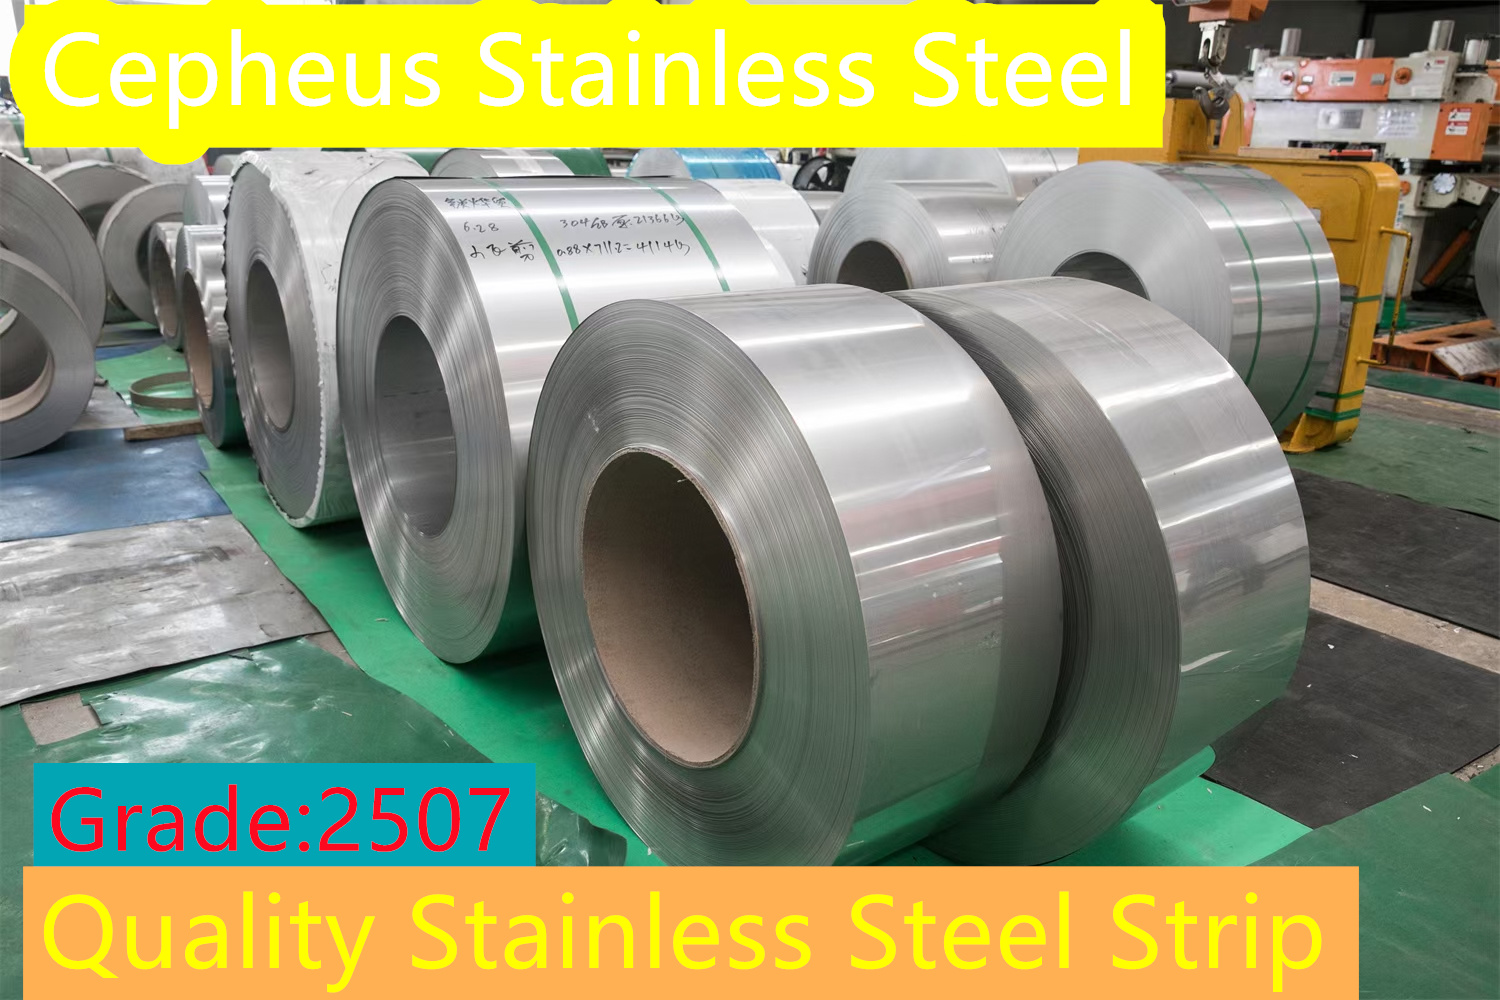 OEM Supply 201 Stainless Steel Coil - Super Duplex 2507 Pipe and ASTM A790 UNS S32750 – Cepheus